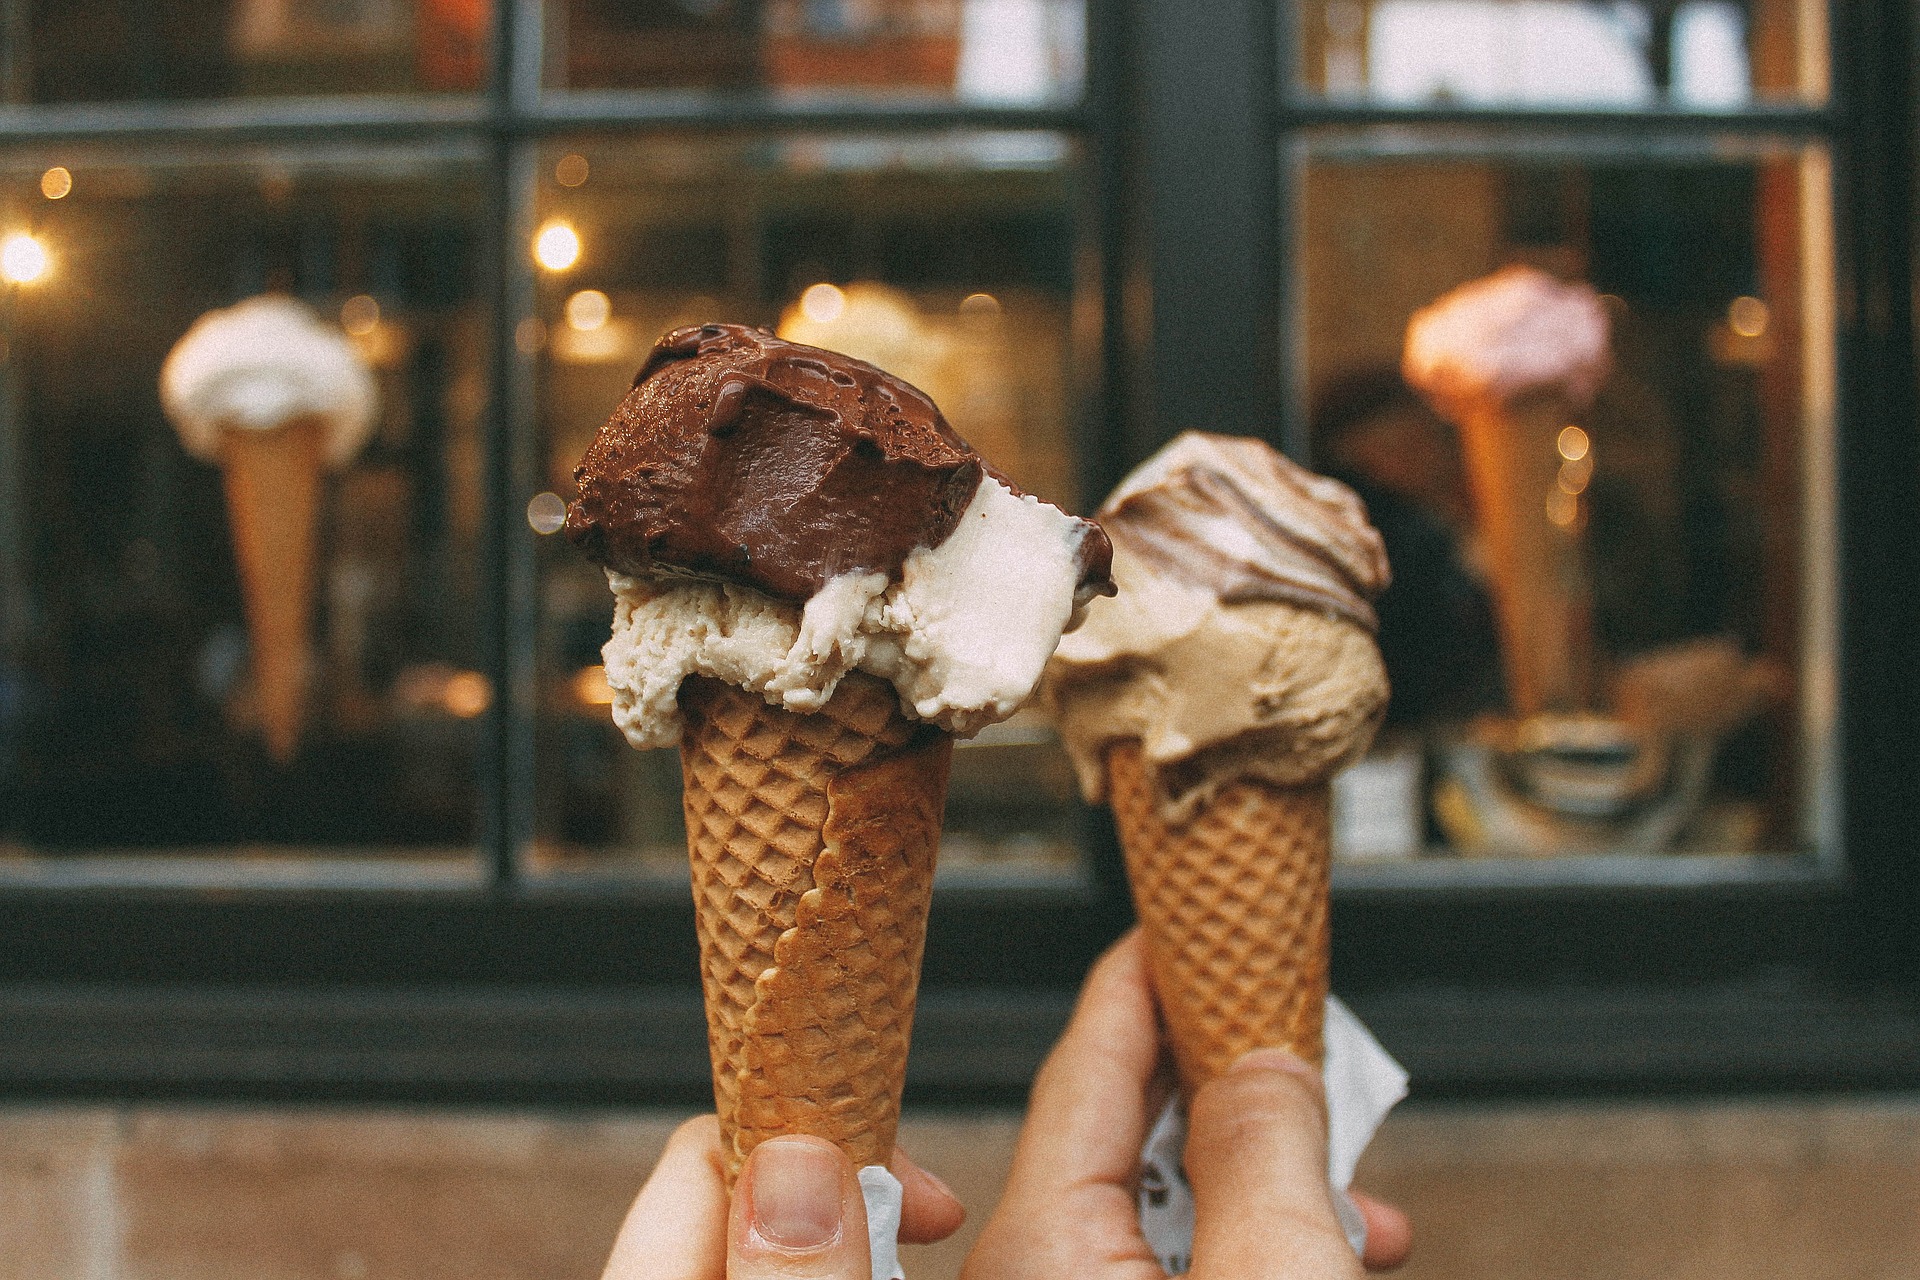 Two hands holding an ice cream cone each.